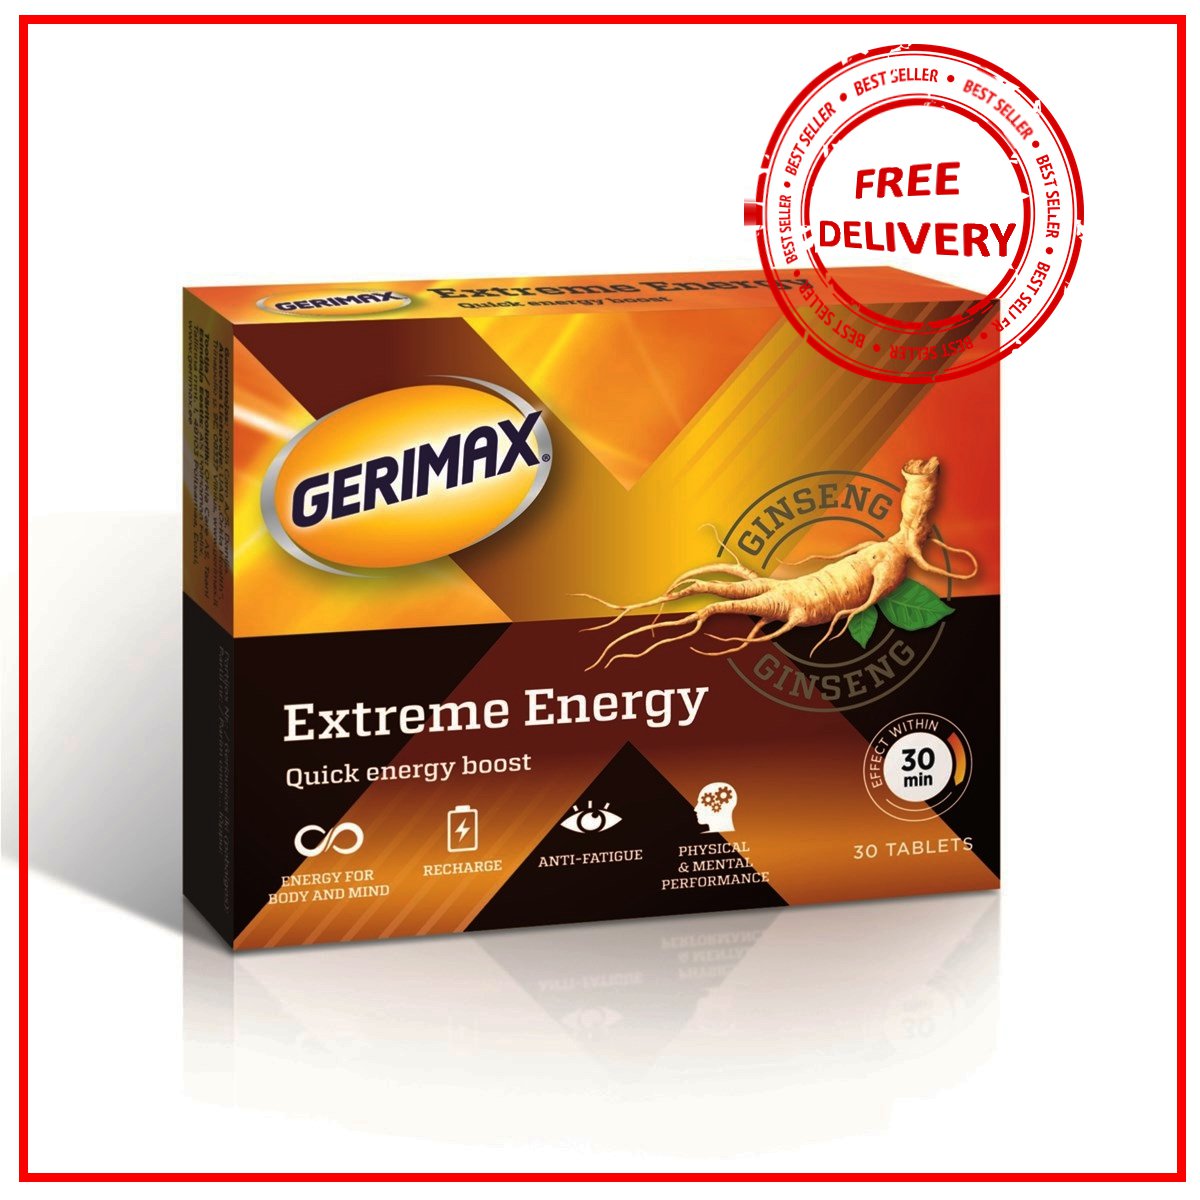 Gerimax Extreme Energy tablets N30. Quick Energy boost with Ginseng.